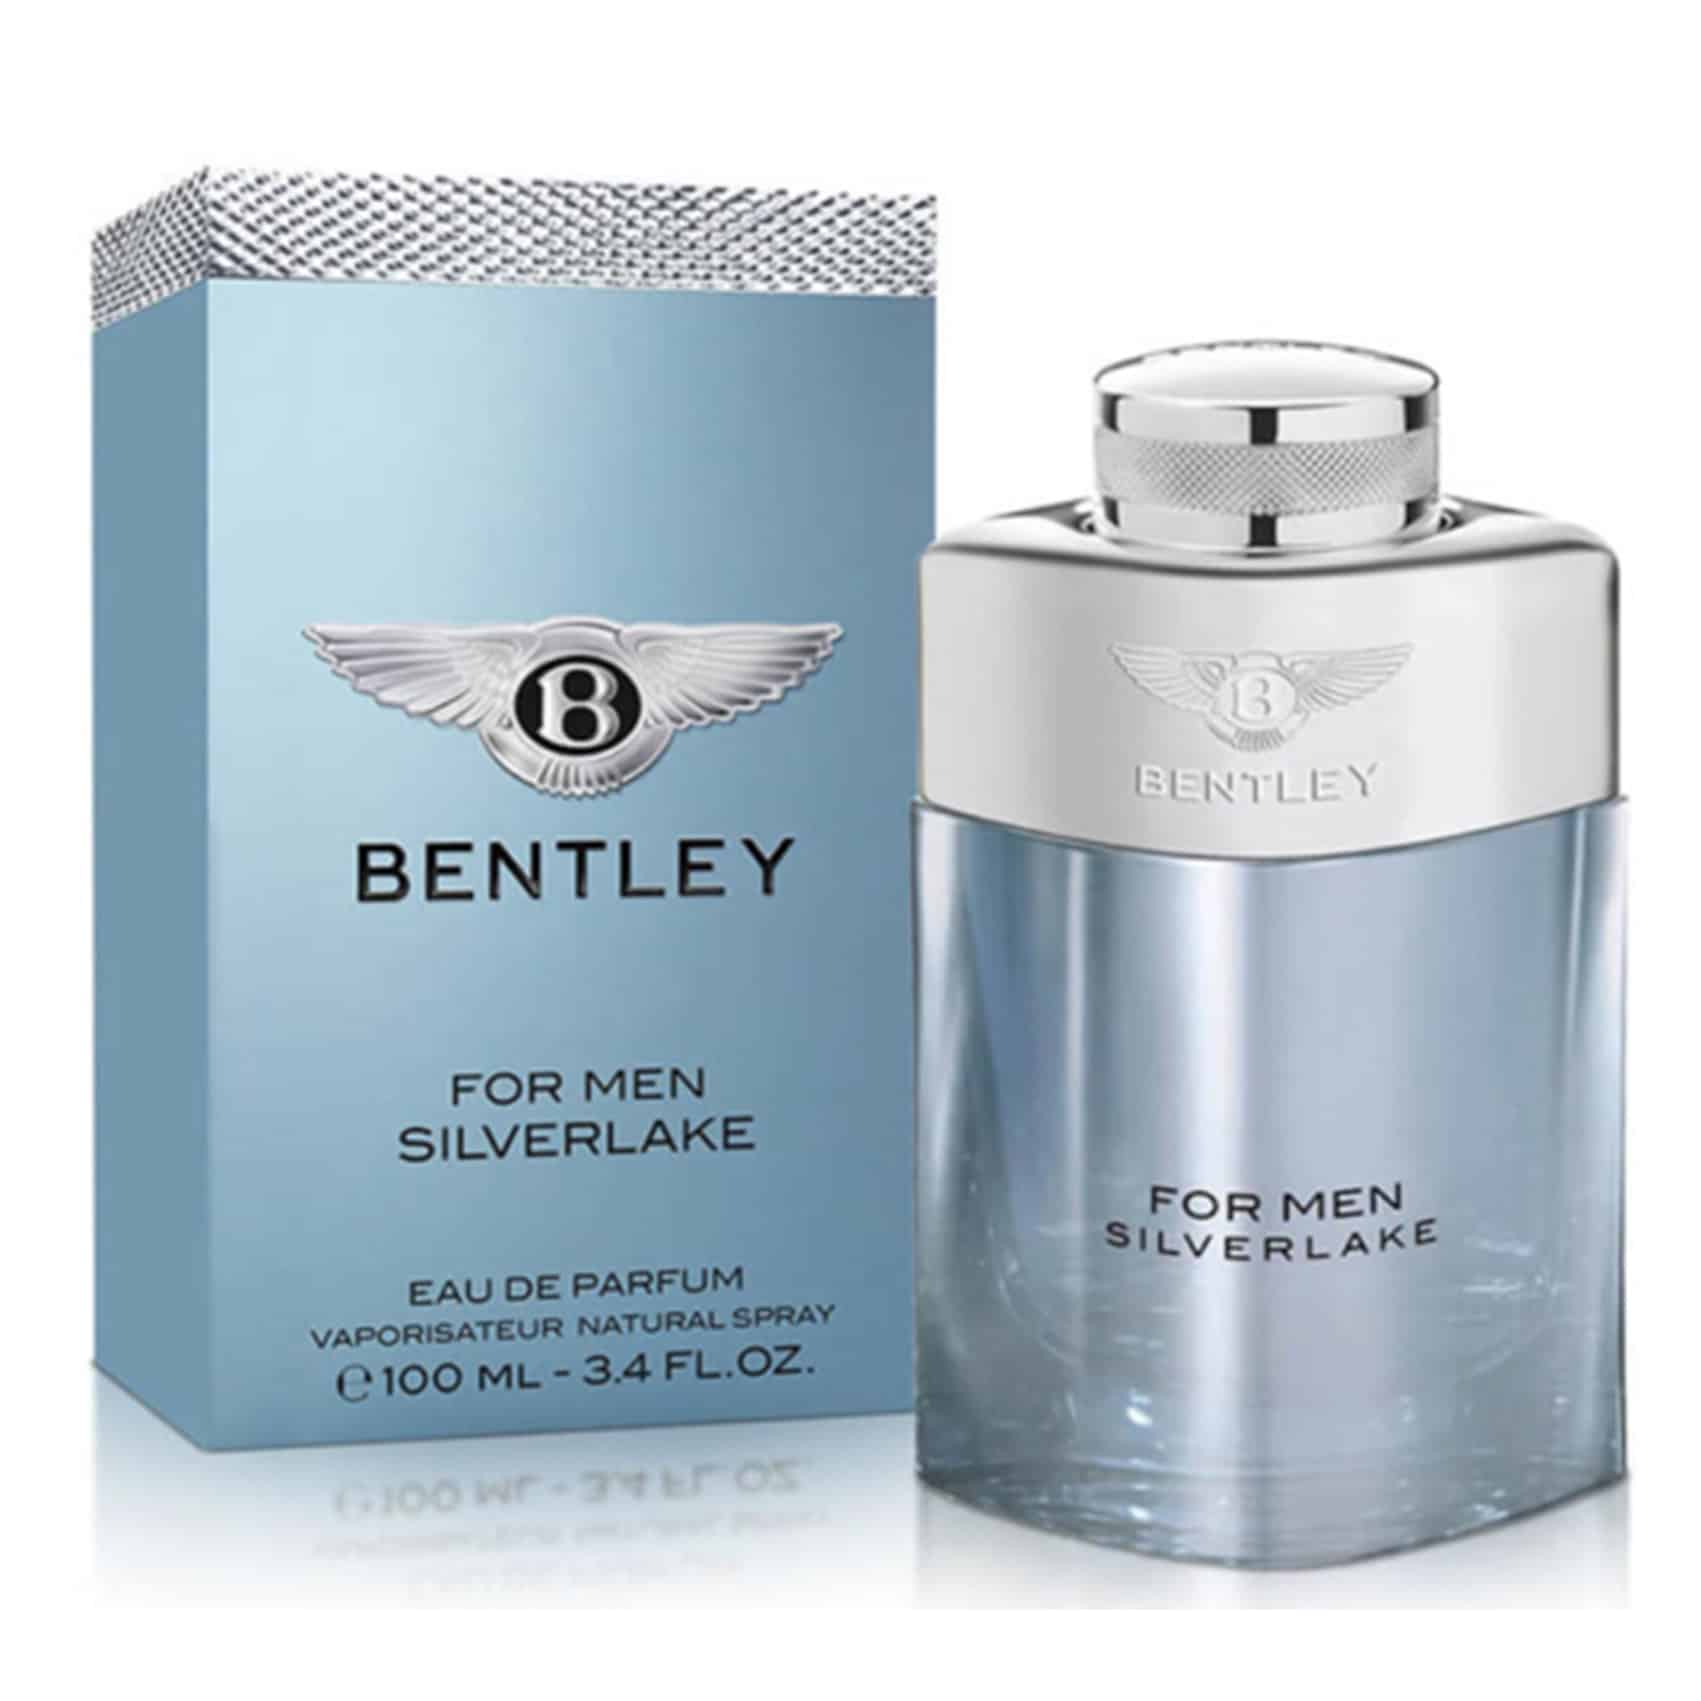 Bentley For Men Silverlake Review: A Fresh and Modern Fragrance ...